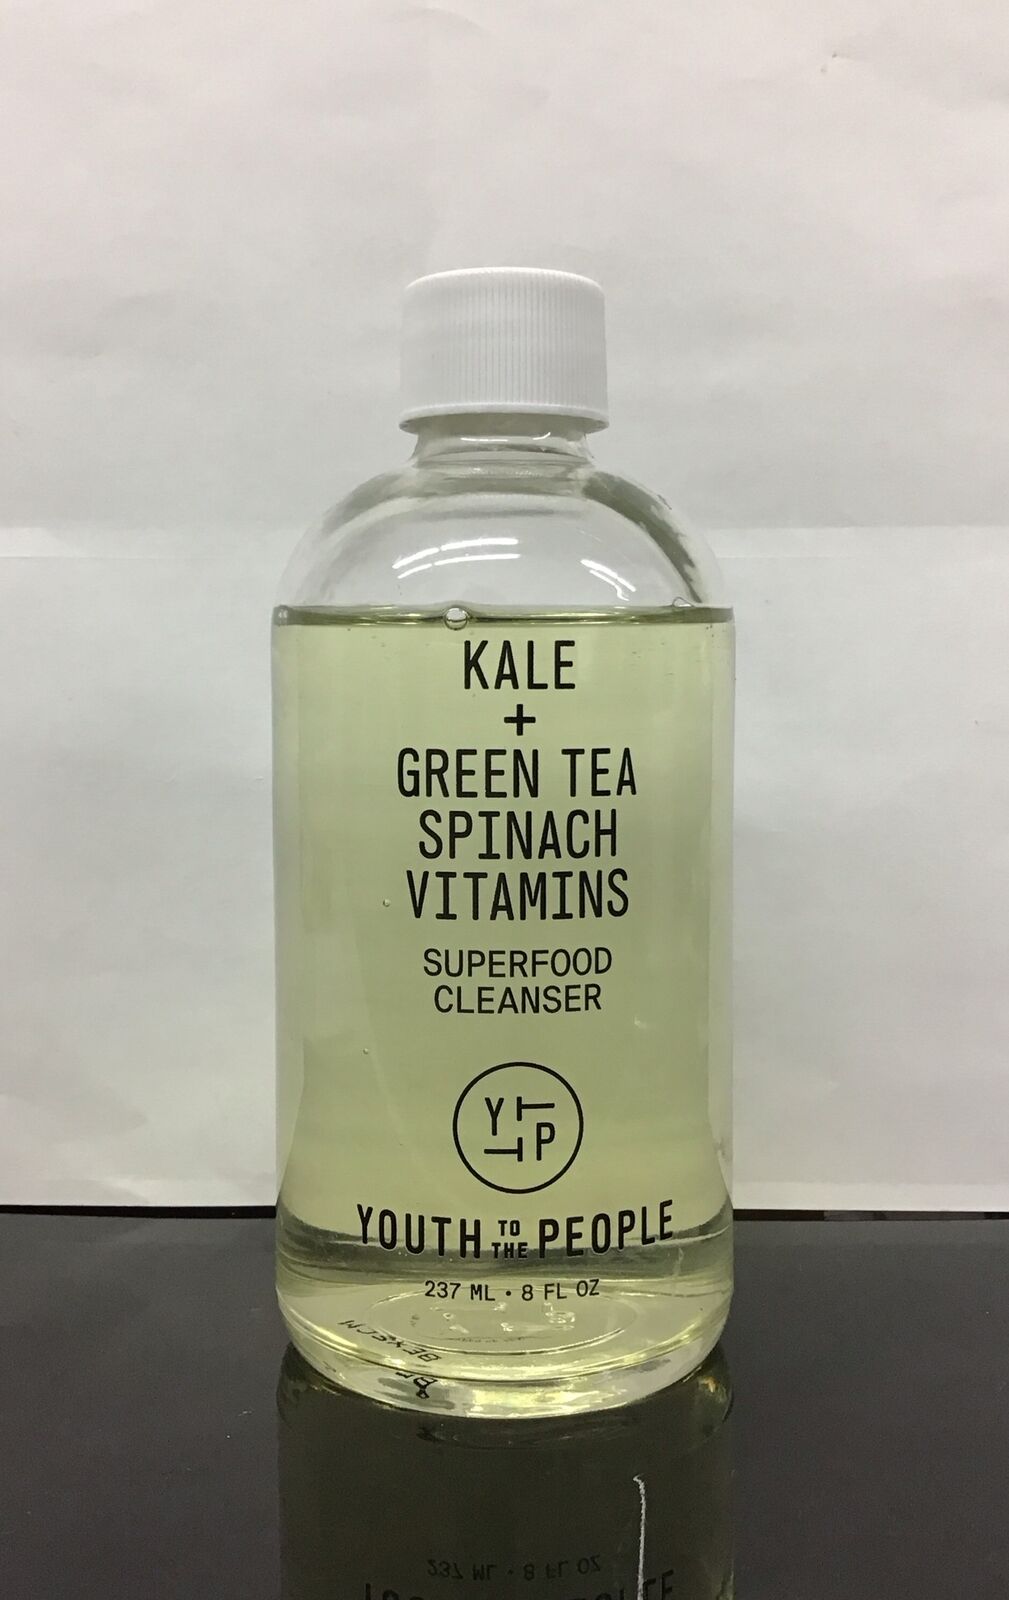 Youth To The People Kale + Great Tea Spinach Vitamins Cleanser 8 Oz. As Pictured